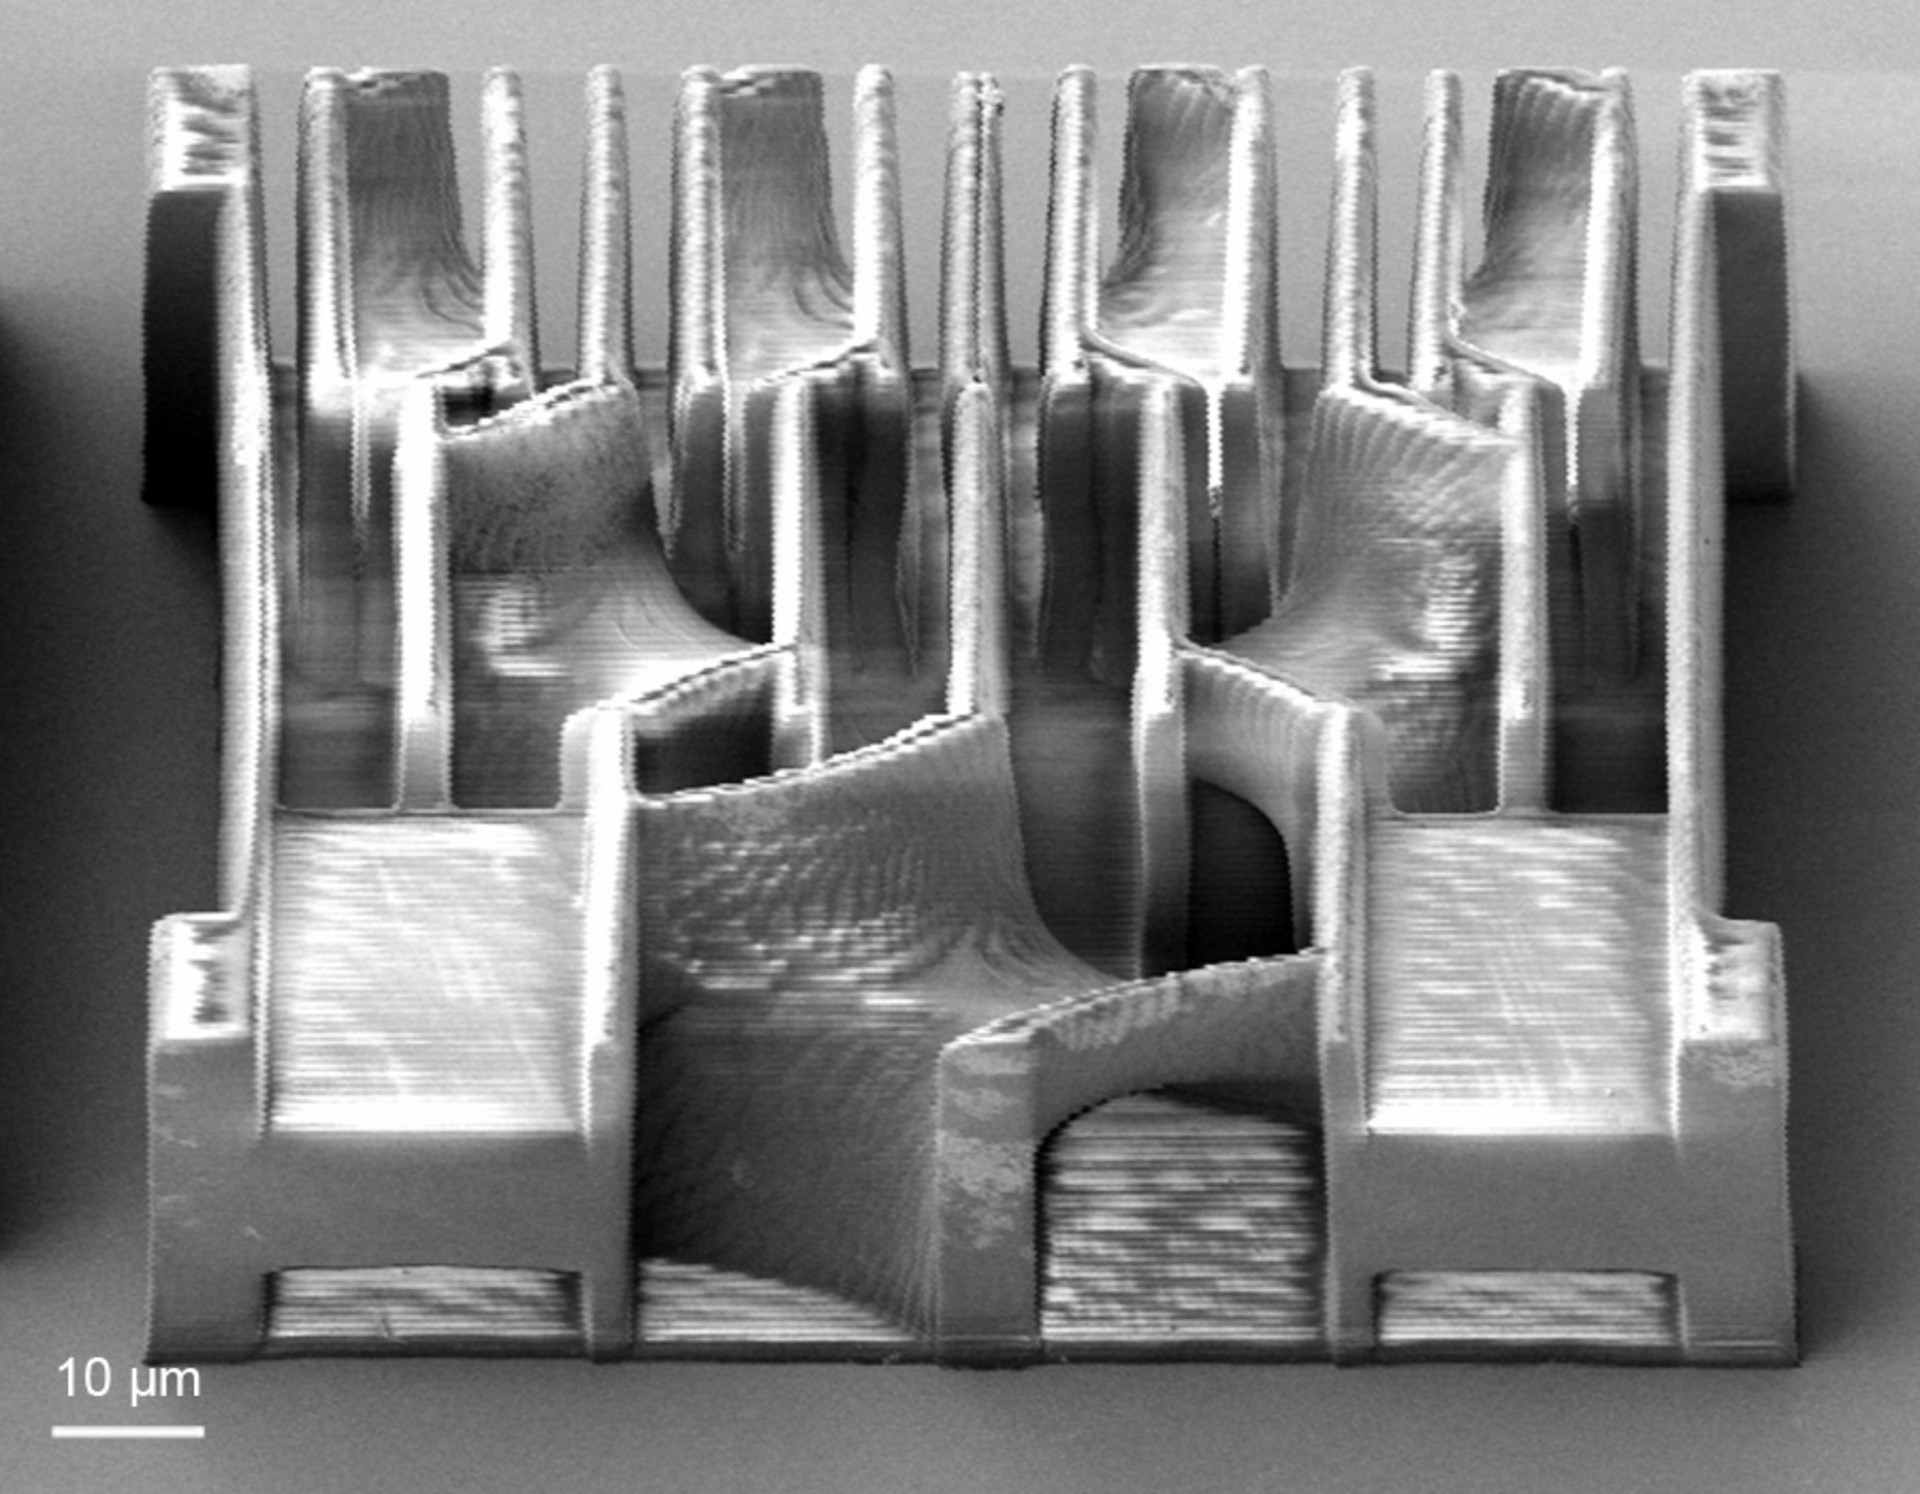 SEM image of a three-stage mixer